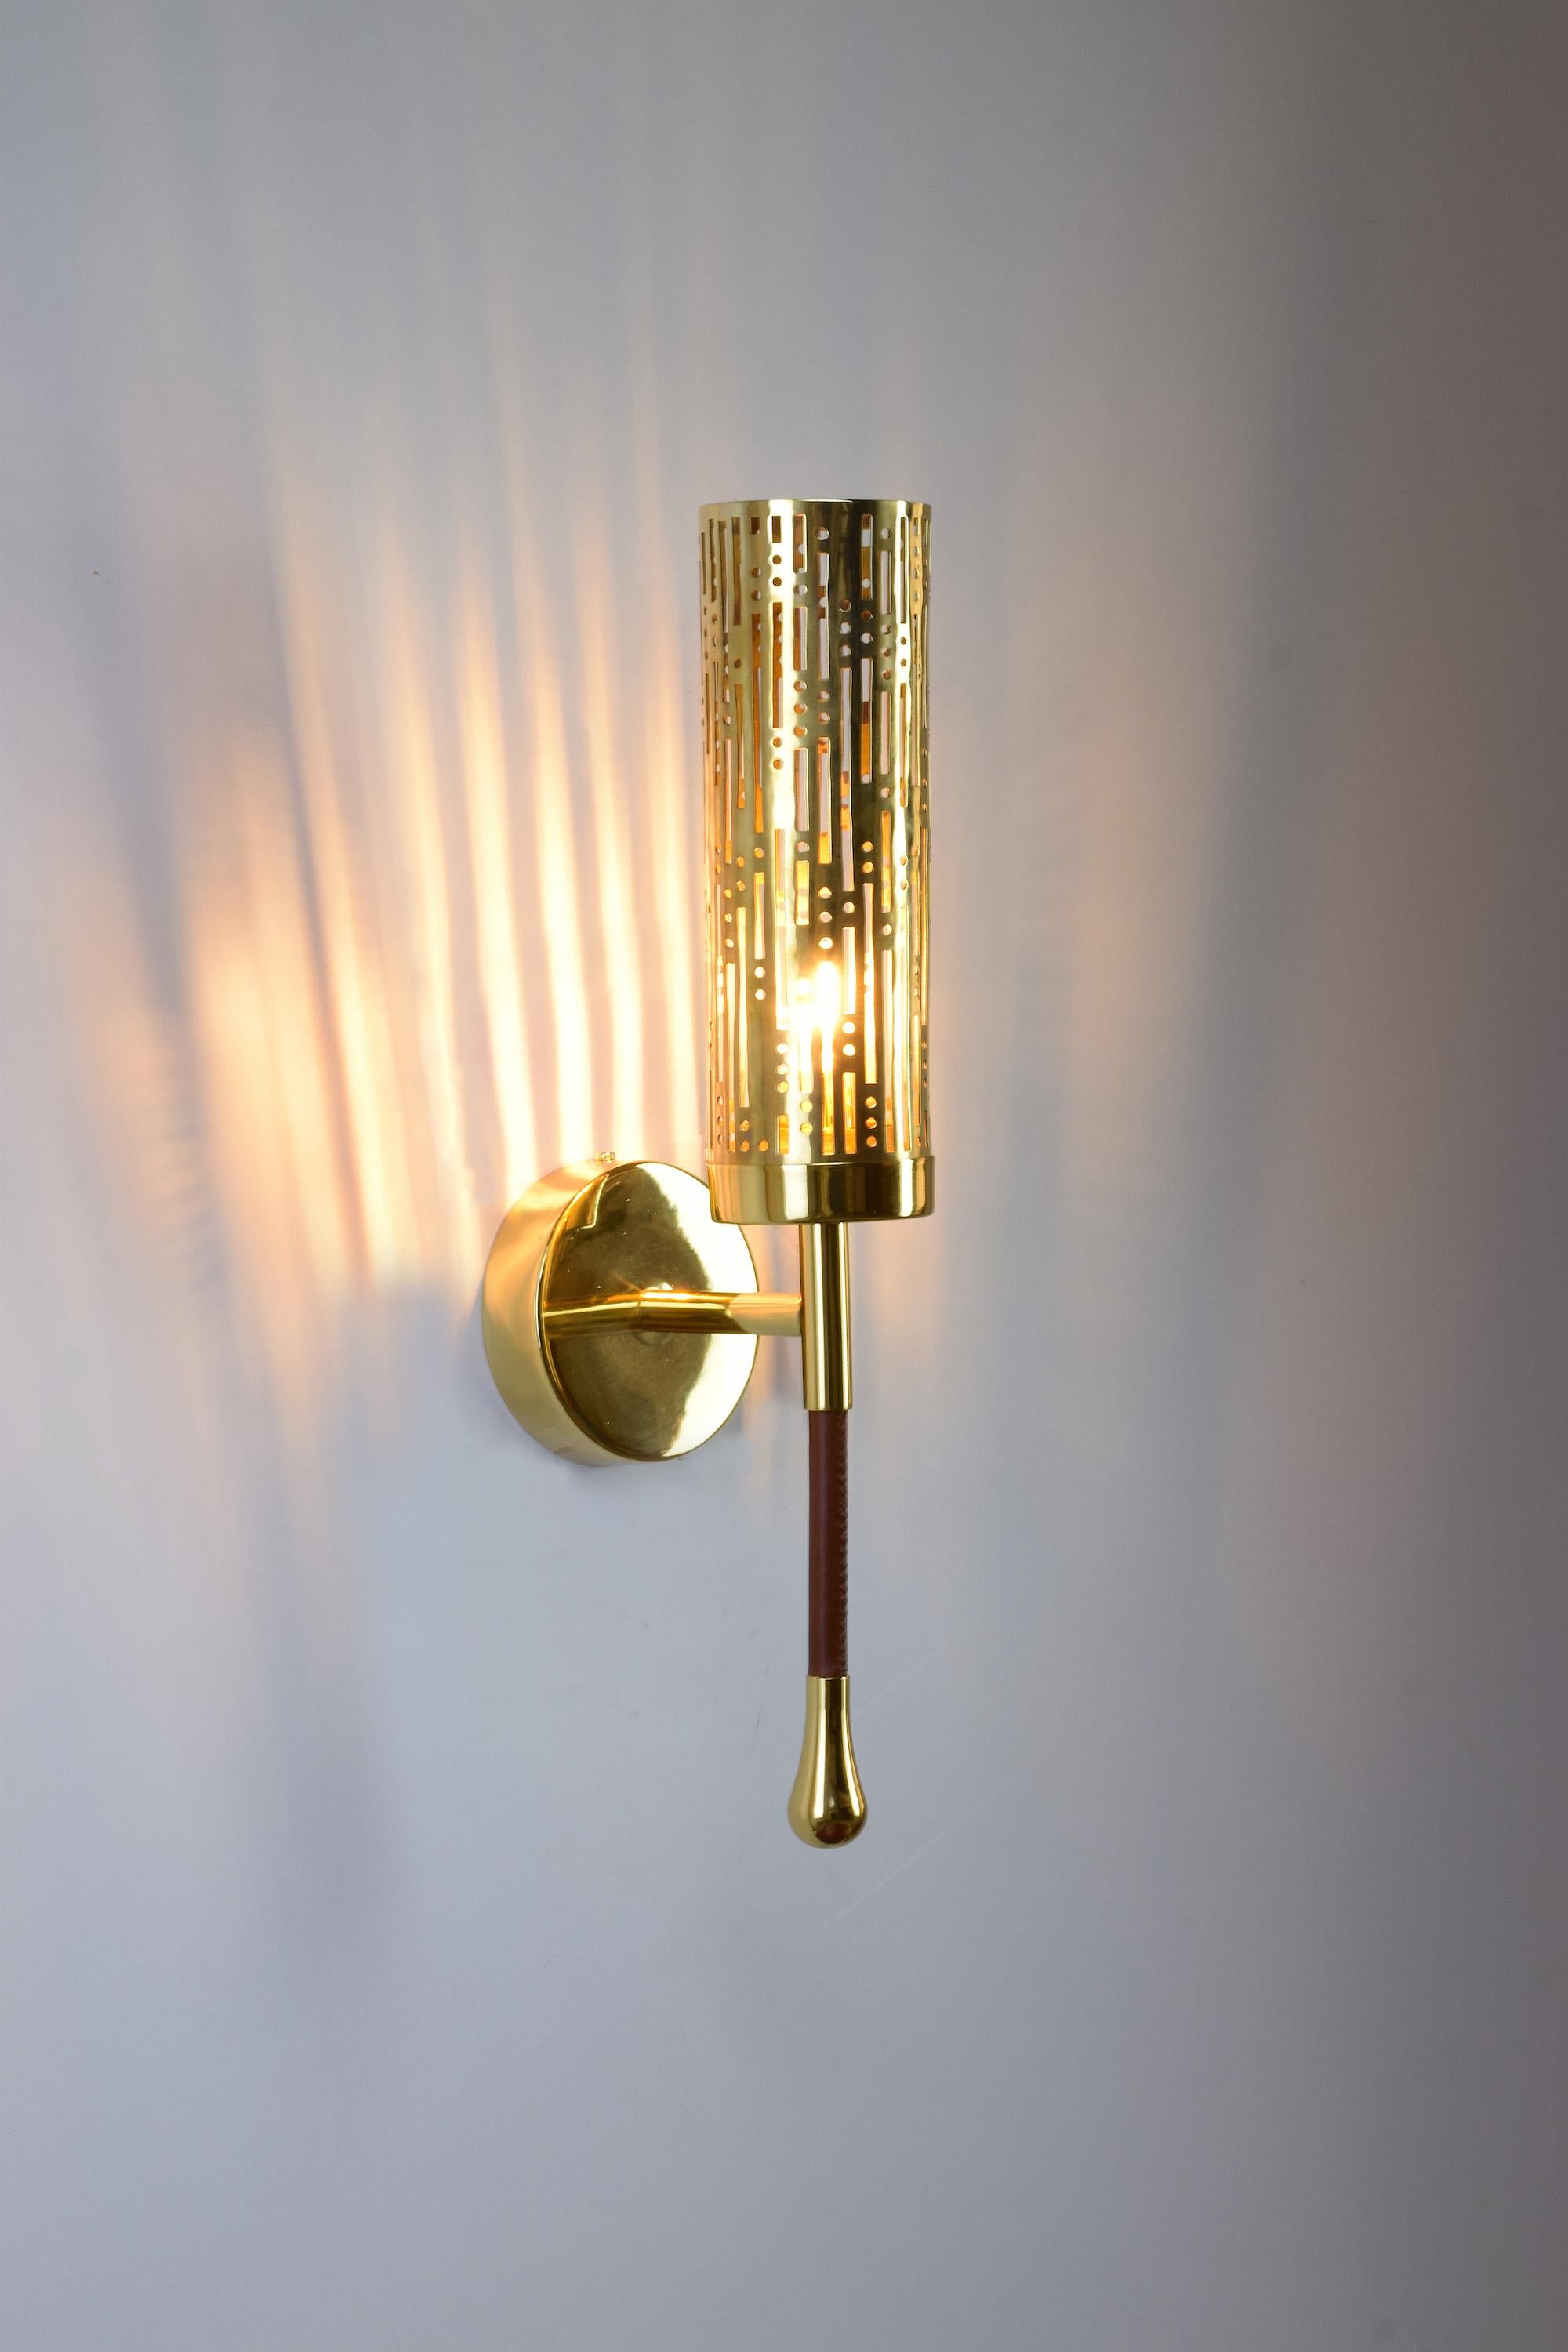 Daya-w1m2 Openwork Brass Wall Light, Flow 2 Collection For Sale 4